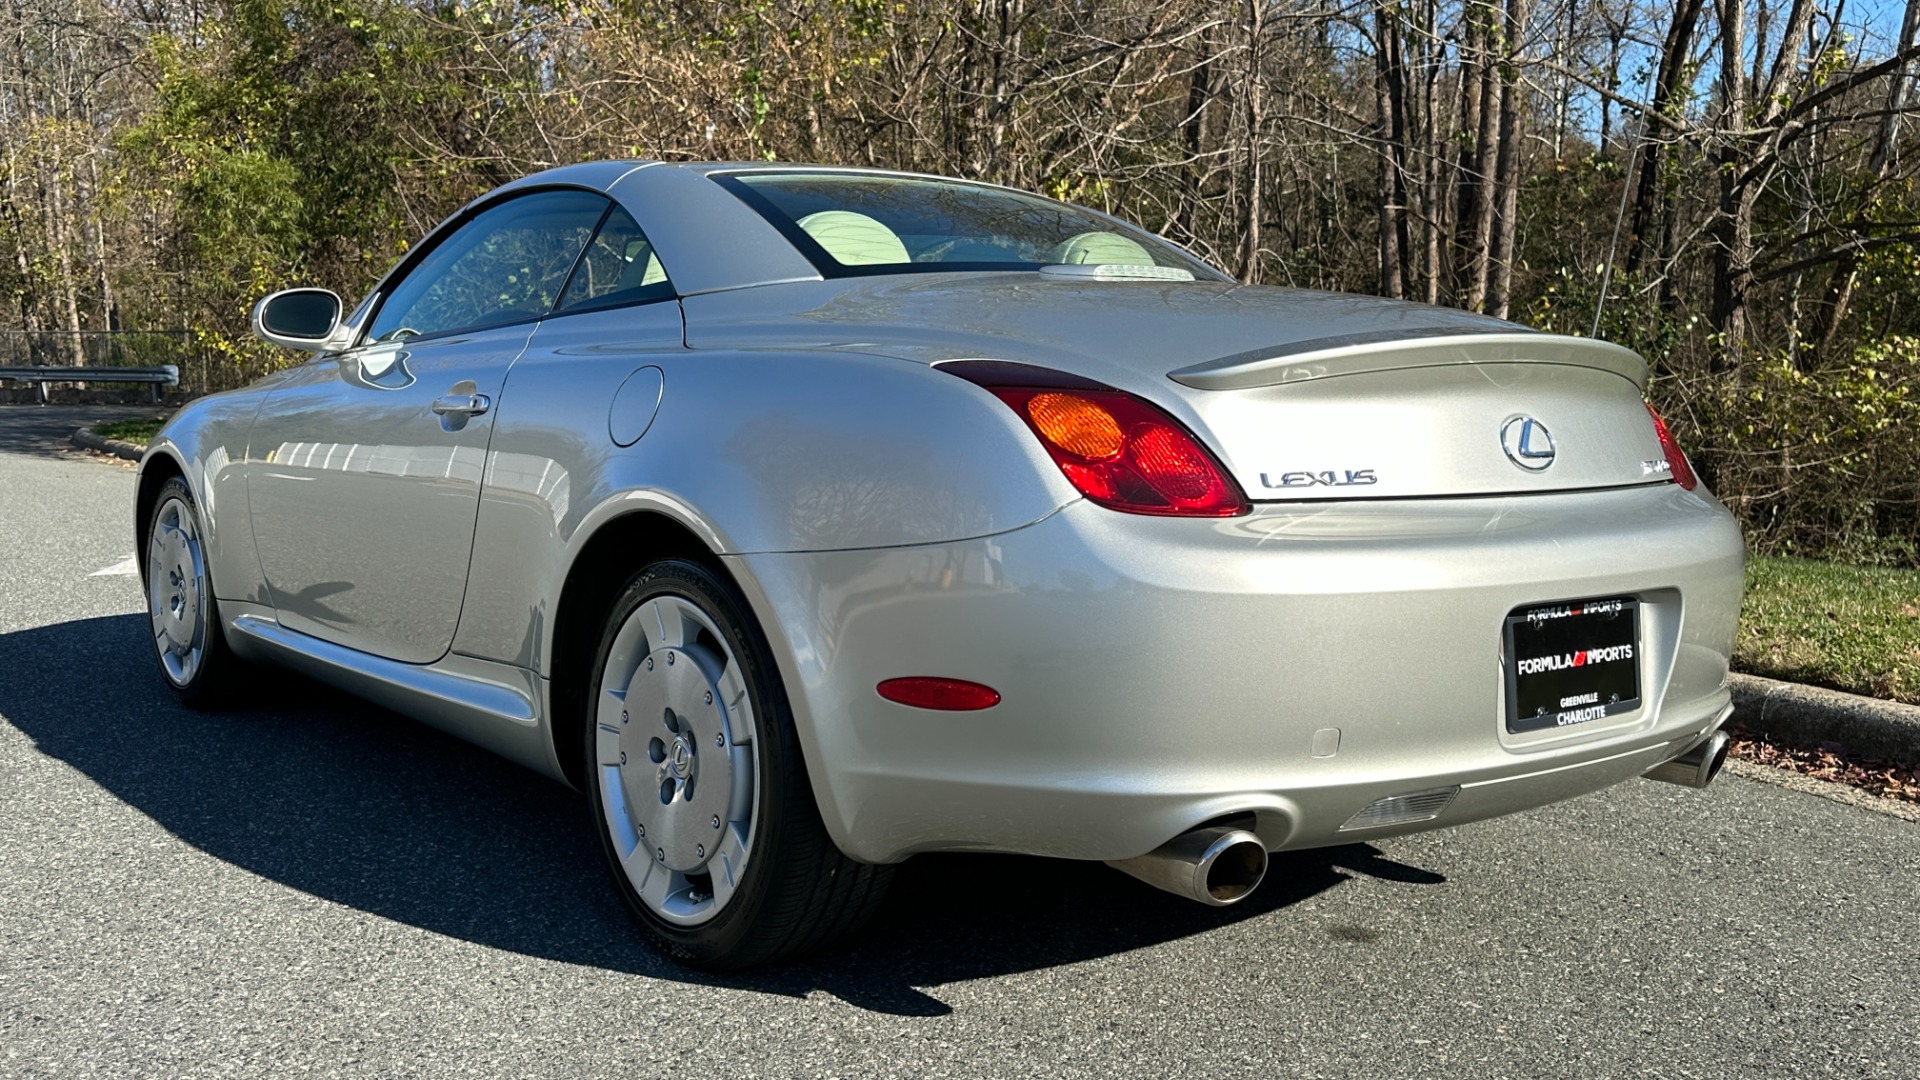 Used 2003 Lexus SC 430 HARD TOP CONVERTIBLE / TAN LEATHER INTERIOR / LOW MILES / 4.3L V8 ENGINE for sale $23,995 at Formula Imports in Charlotte NC 28227 7